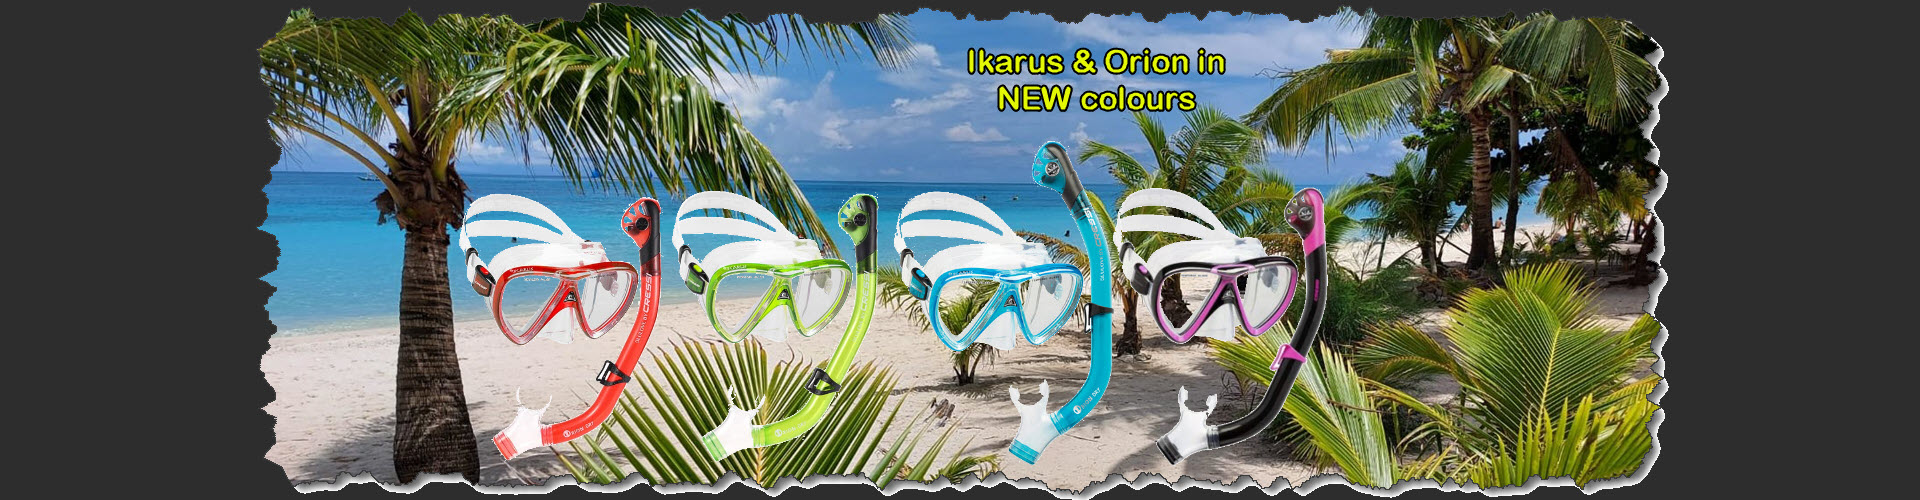 Ikarus-Orion new colours